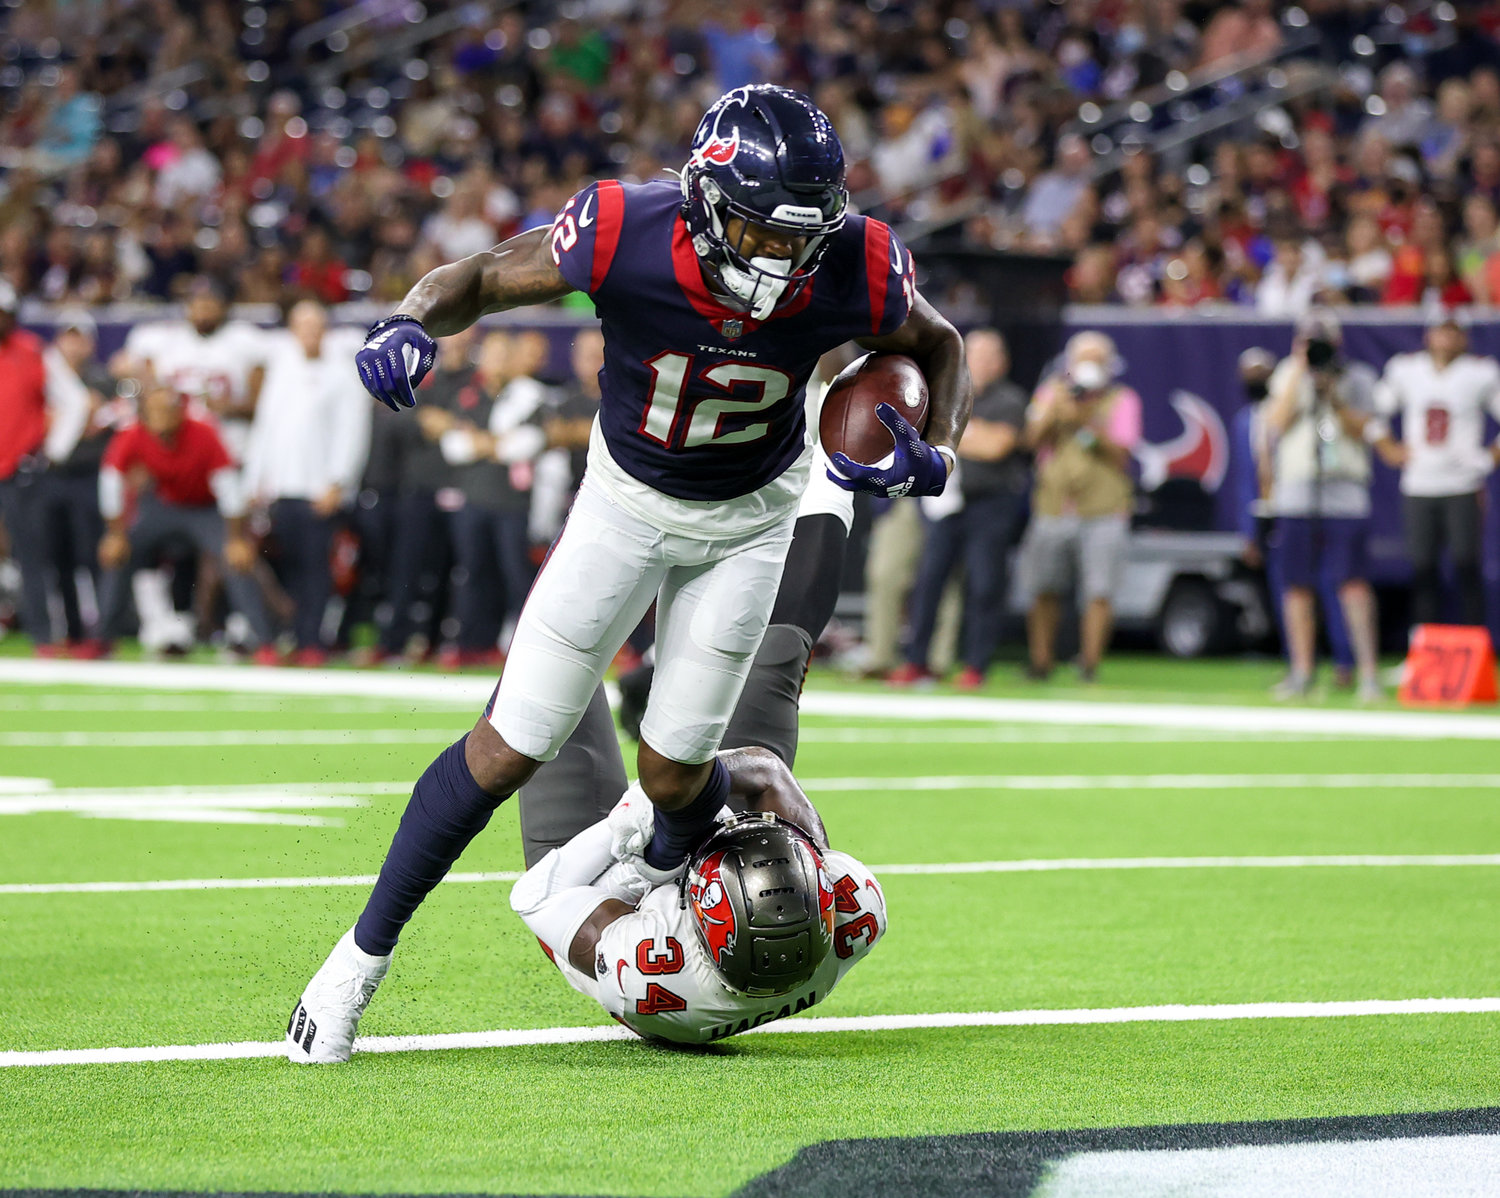 Houston Texans wide receiver Nico Collins (12) scores on an 11-yard pass from quarterback Davis Mills (10) during an NFL preseason game between the Houston Texans and the Tampa Bay Buccaneers on August 28, 2021 in Houston, Texas.